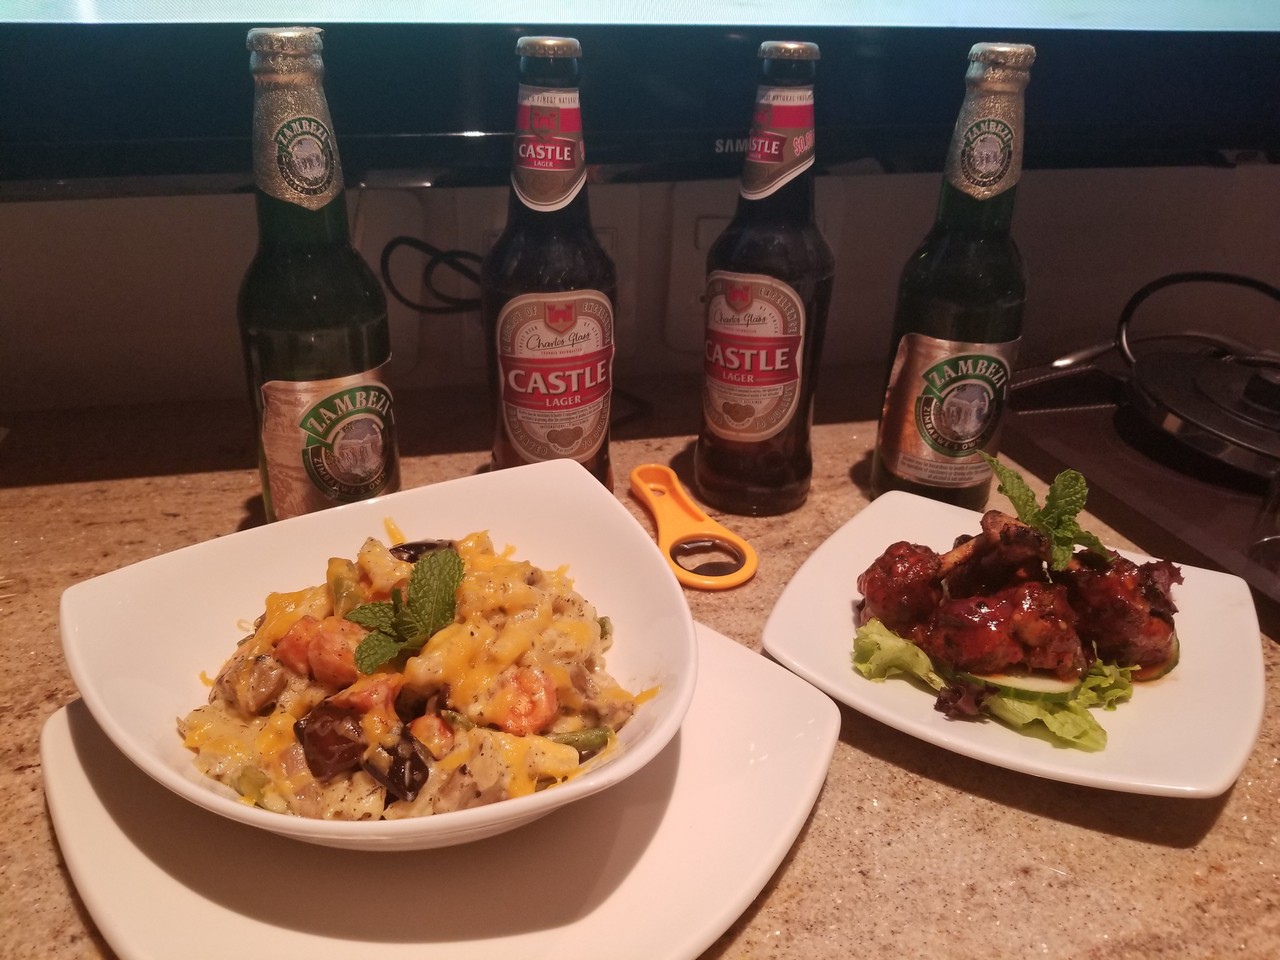 a plate of food and beer bottles on a counter